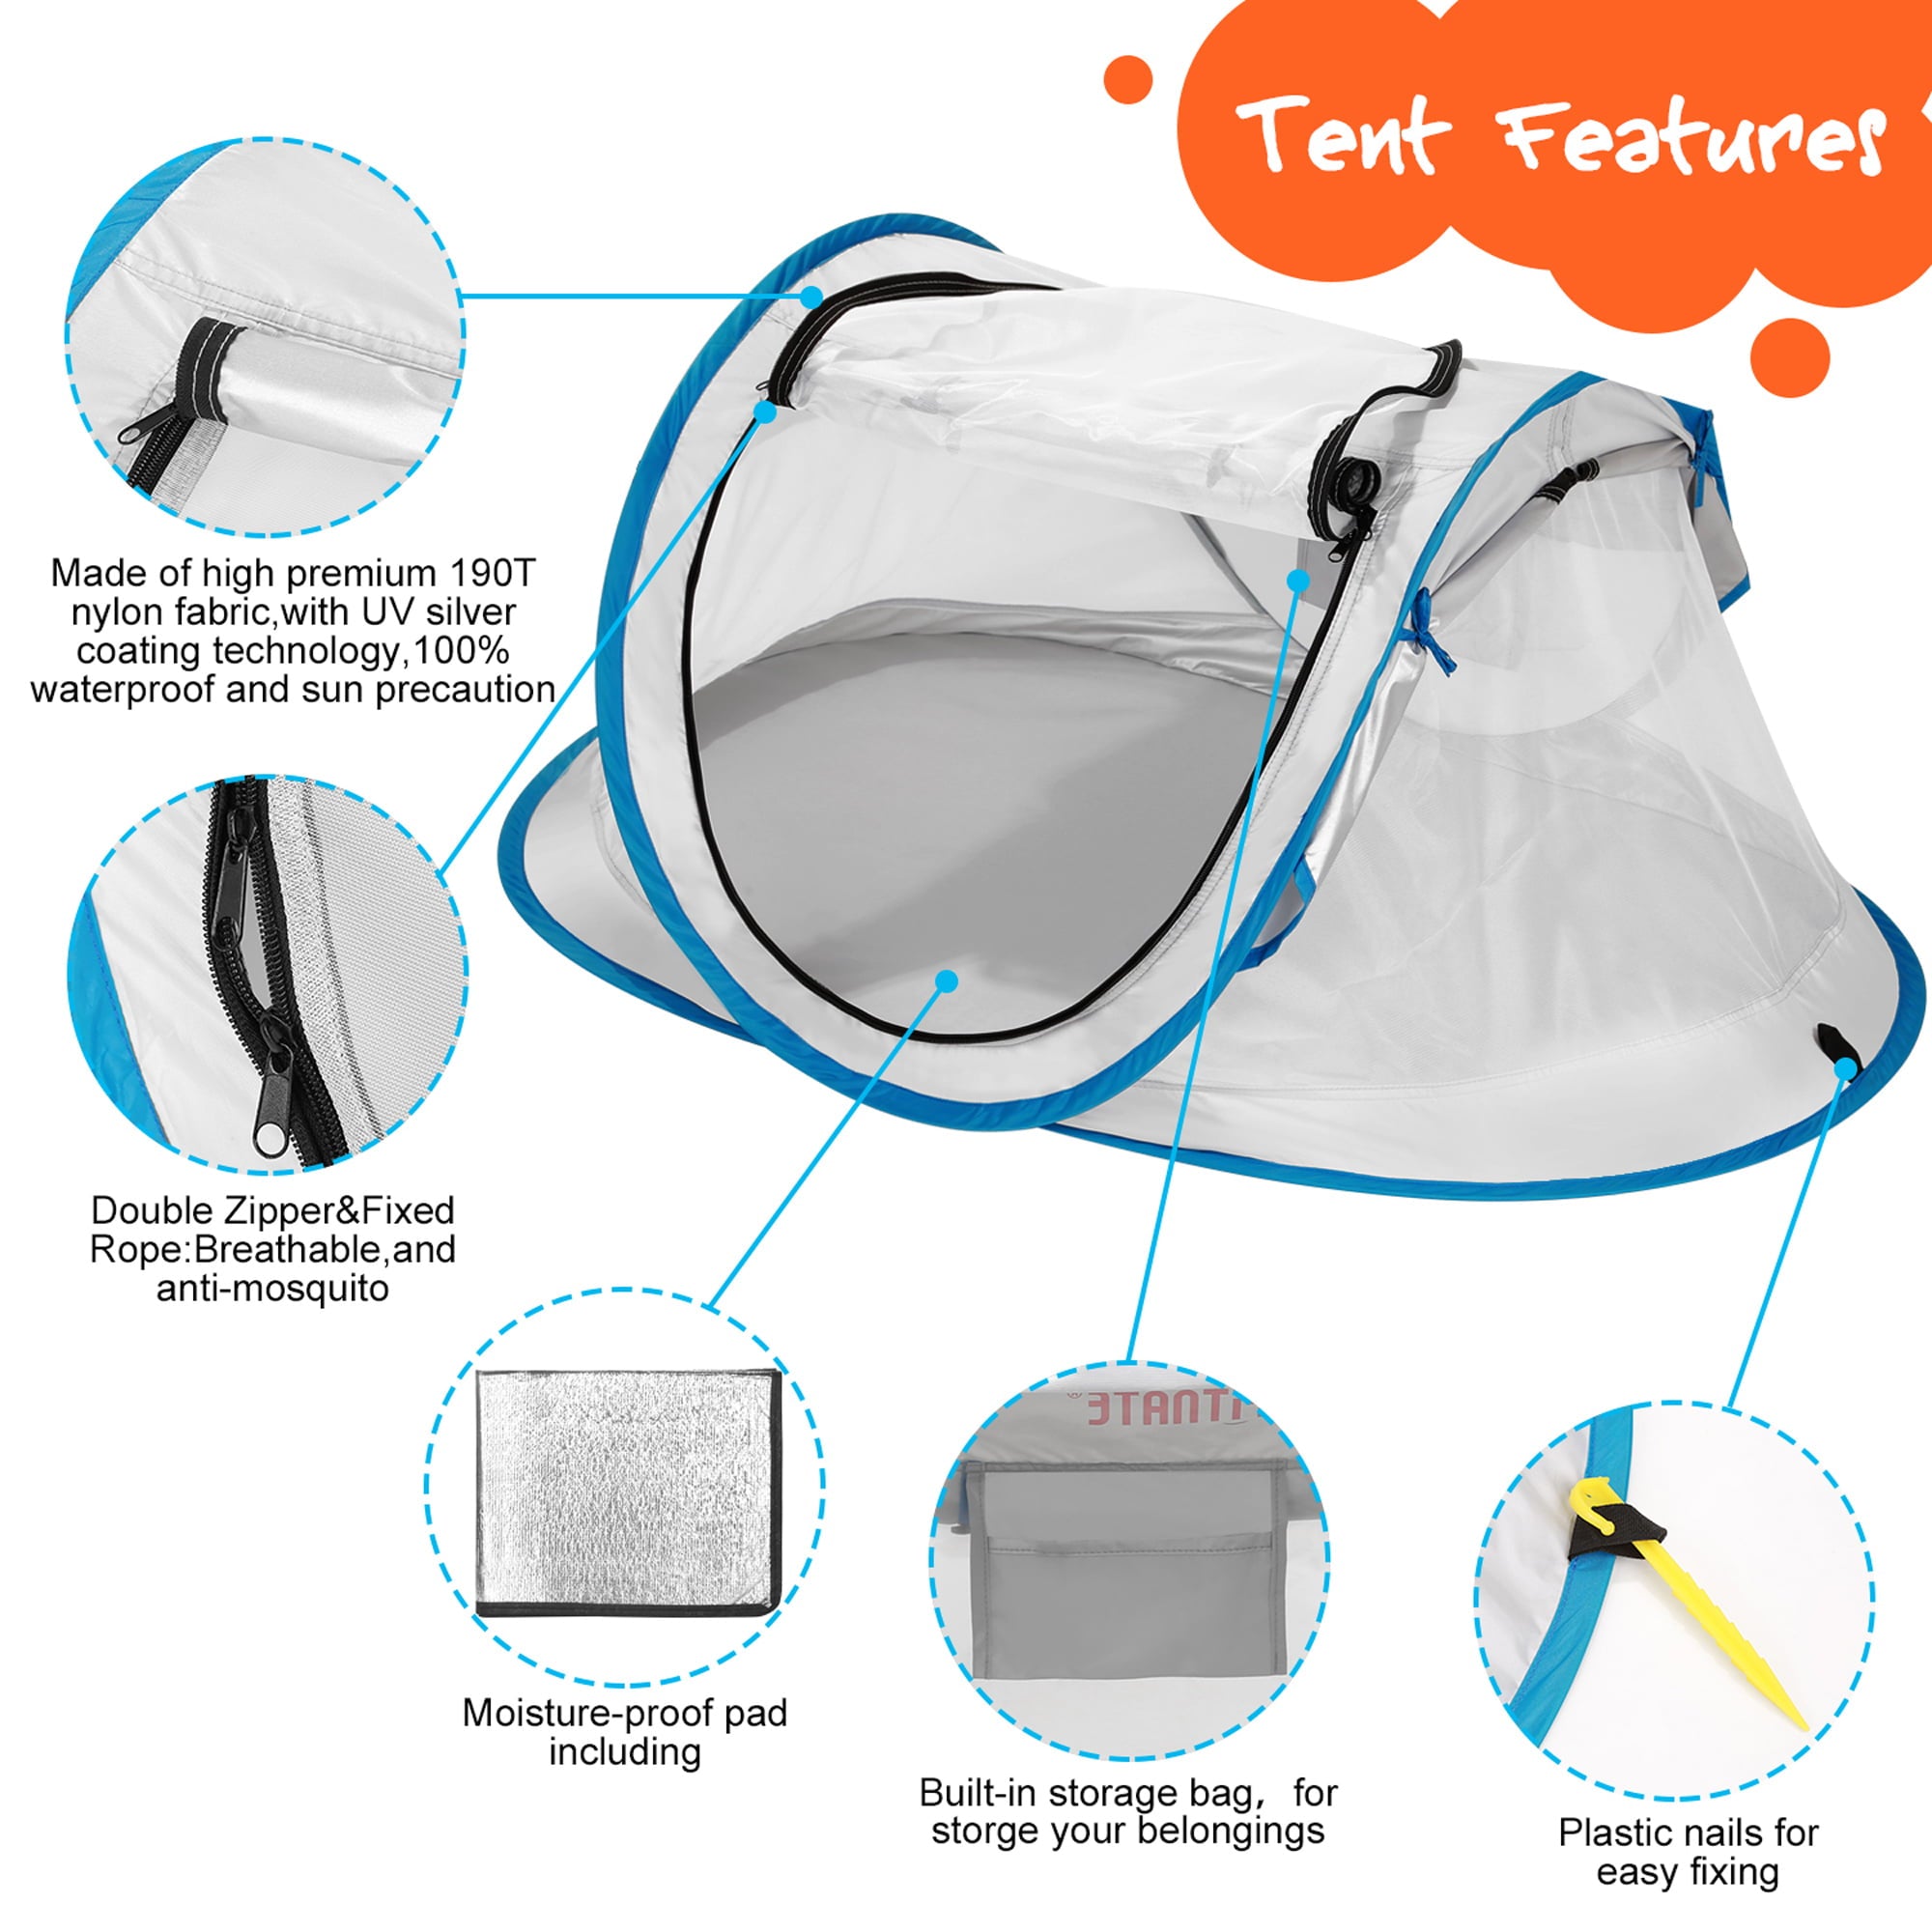 FINATE Baby Beach Tent UPF 50+UV Protection， Waterproof， Breathable and Portable， Pop Up Travel Tent Baby Mosquito Net for Beach， Garden， Camping， Hiking